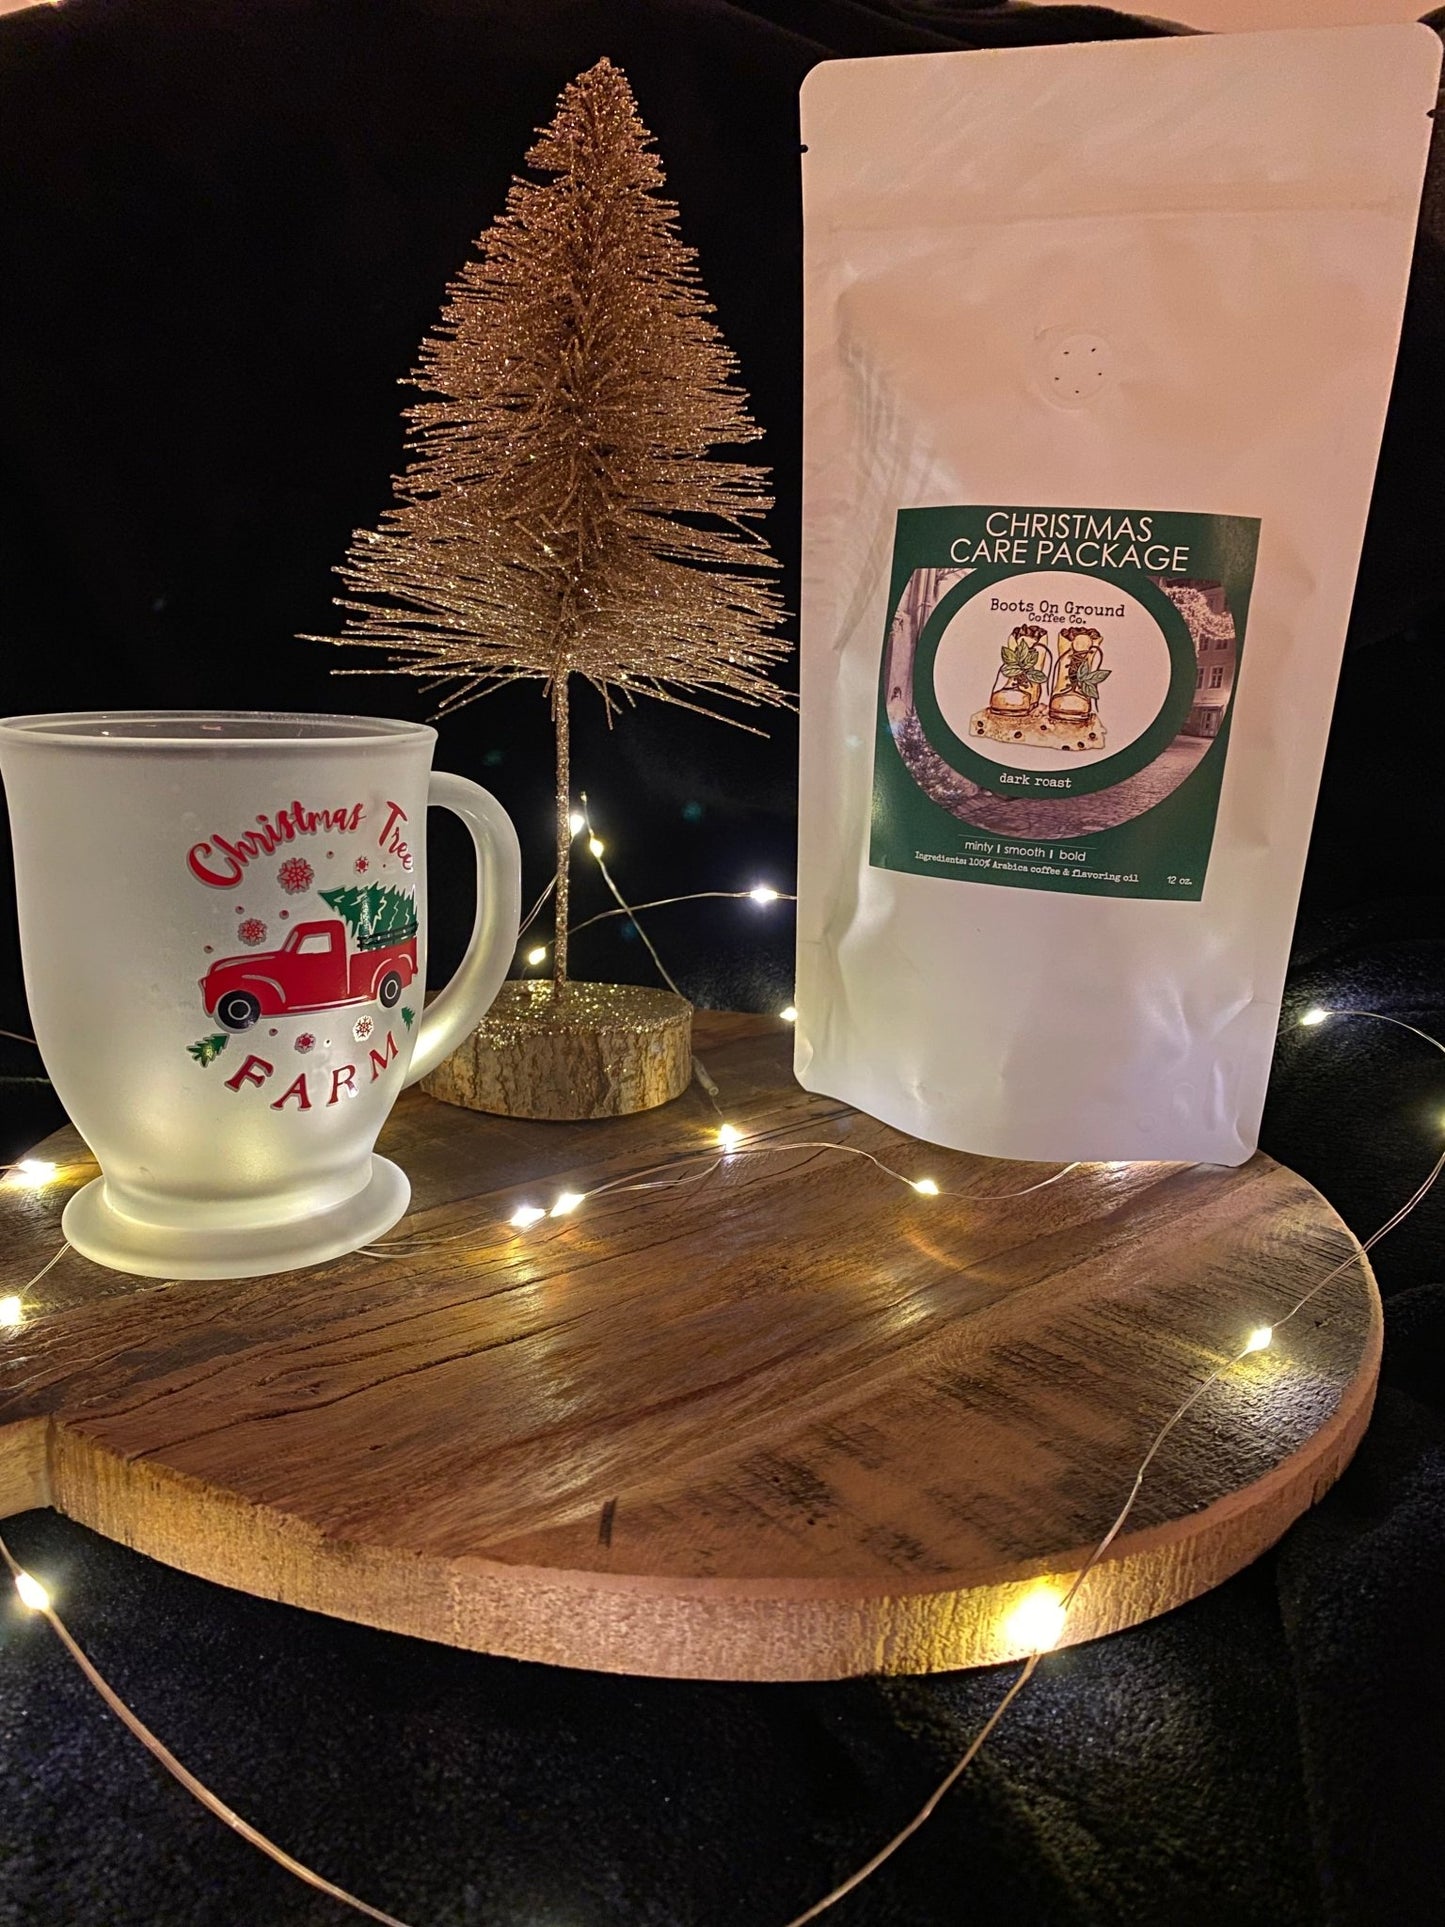 Christmas Care Package *Limited Edition* 12oz Gourmet Ground Coffee - Boots on ground coffee co